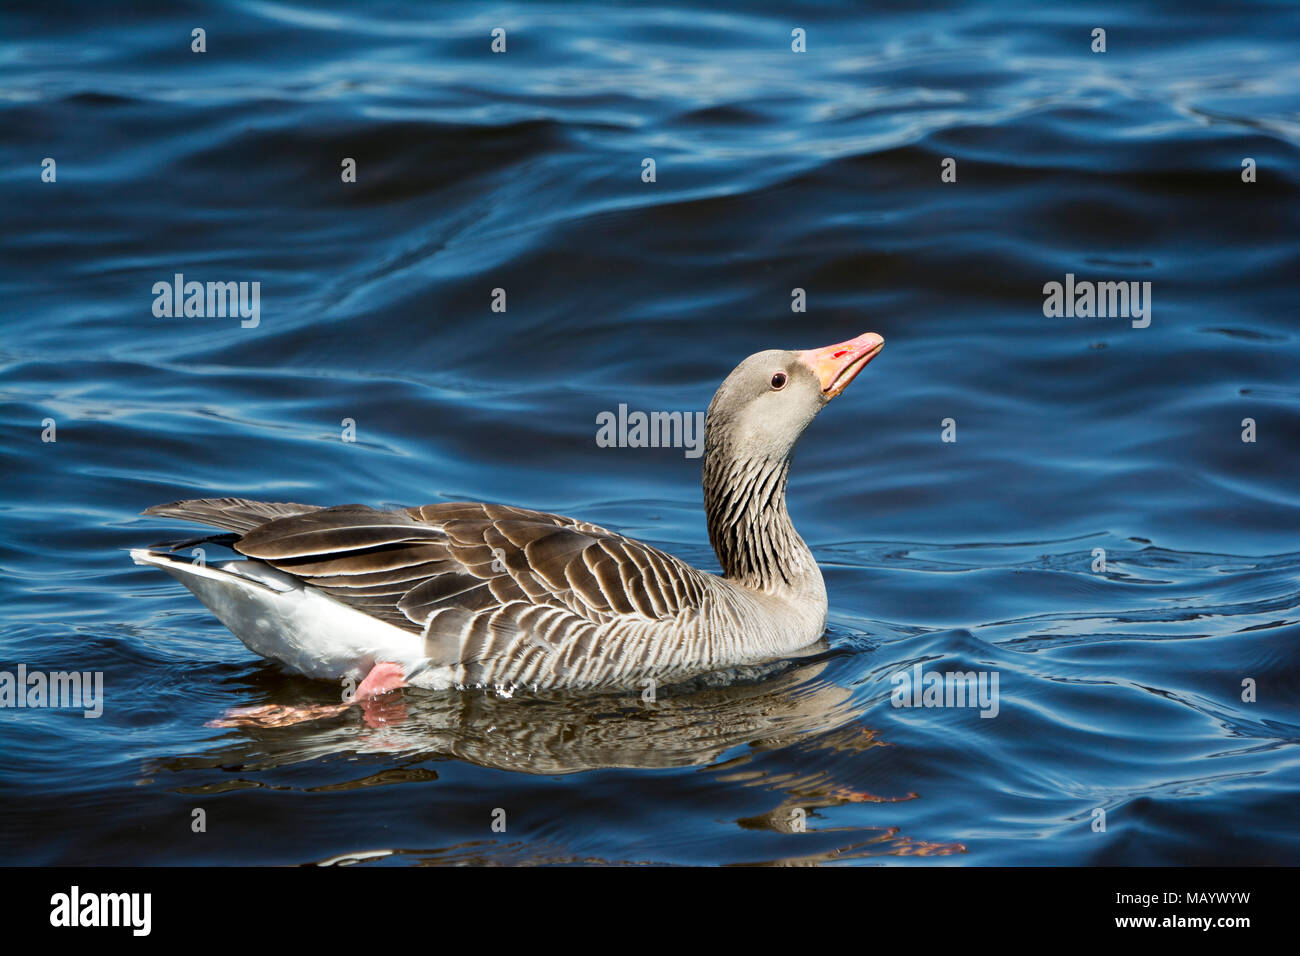 Greylag goose (Anser anser) swims in water, Chiemsee, Upper Bavaria, Bavaria, Germany Stock Photo